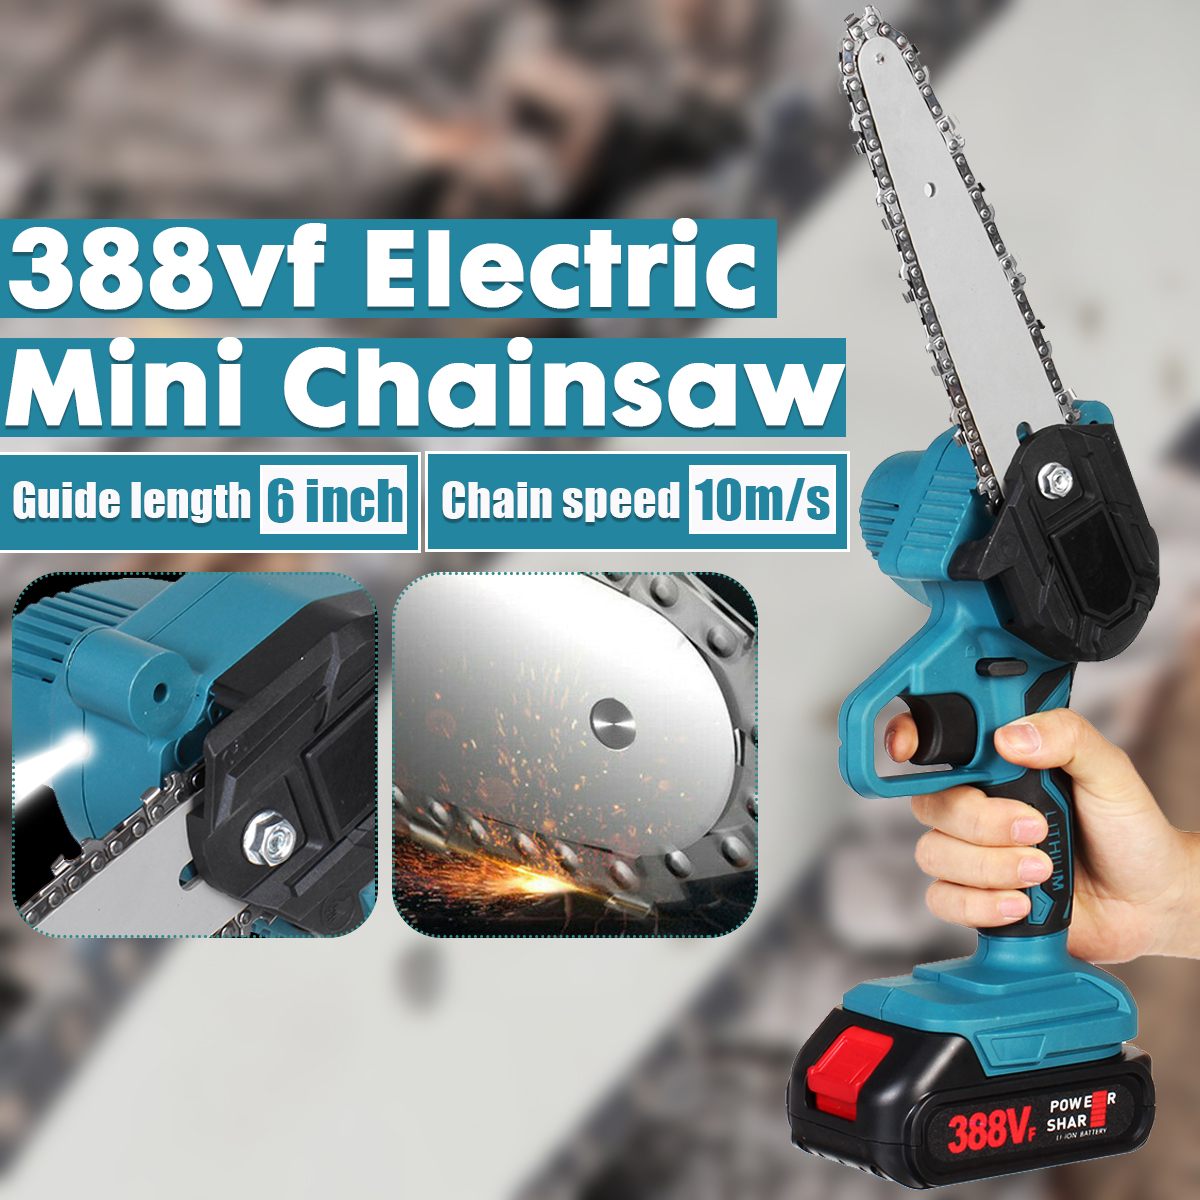 6-Inch-Mini-Cordless-Electric-Chainsaw-Woodworking-Wood-Cutter-Rechargeable-Portable-Chain-Saw-W-Non-1863317-3